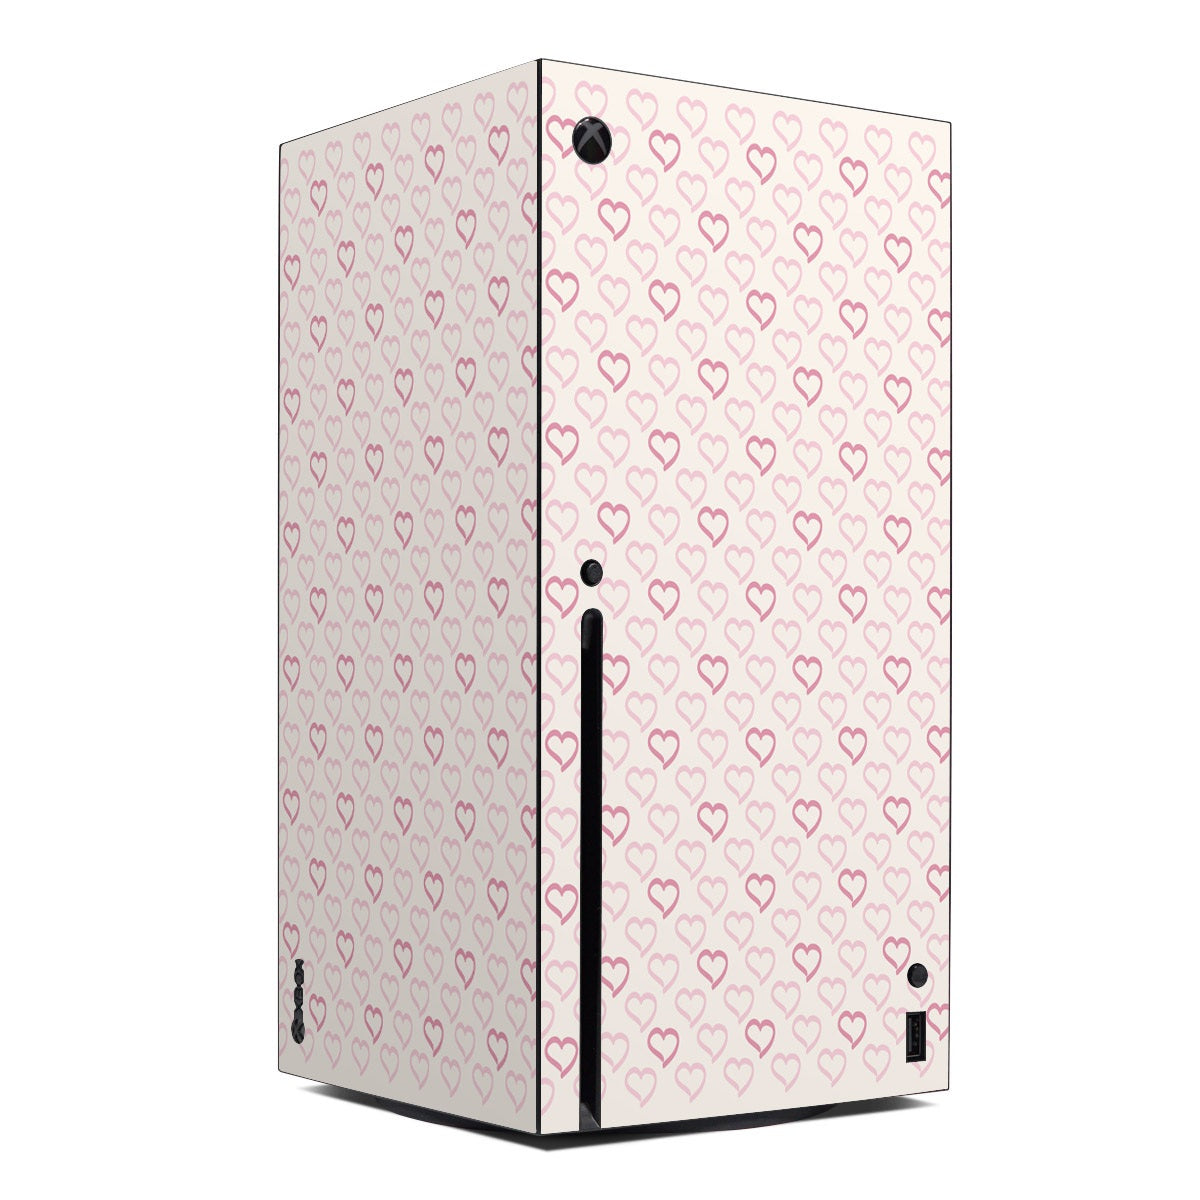 Patterned Hearts - Microsoft Xbox Series X Skin